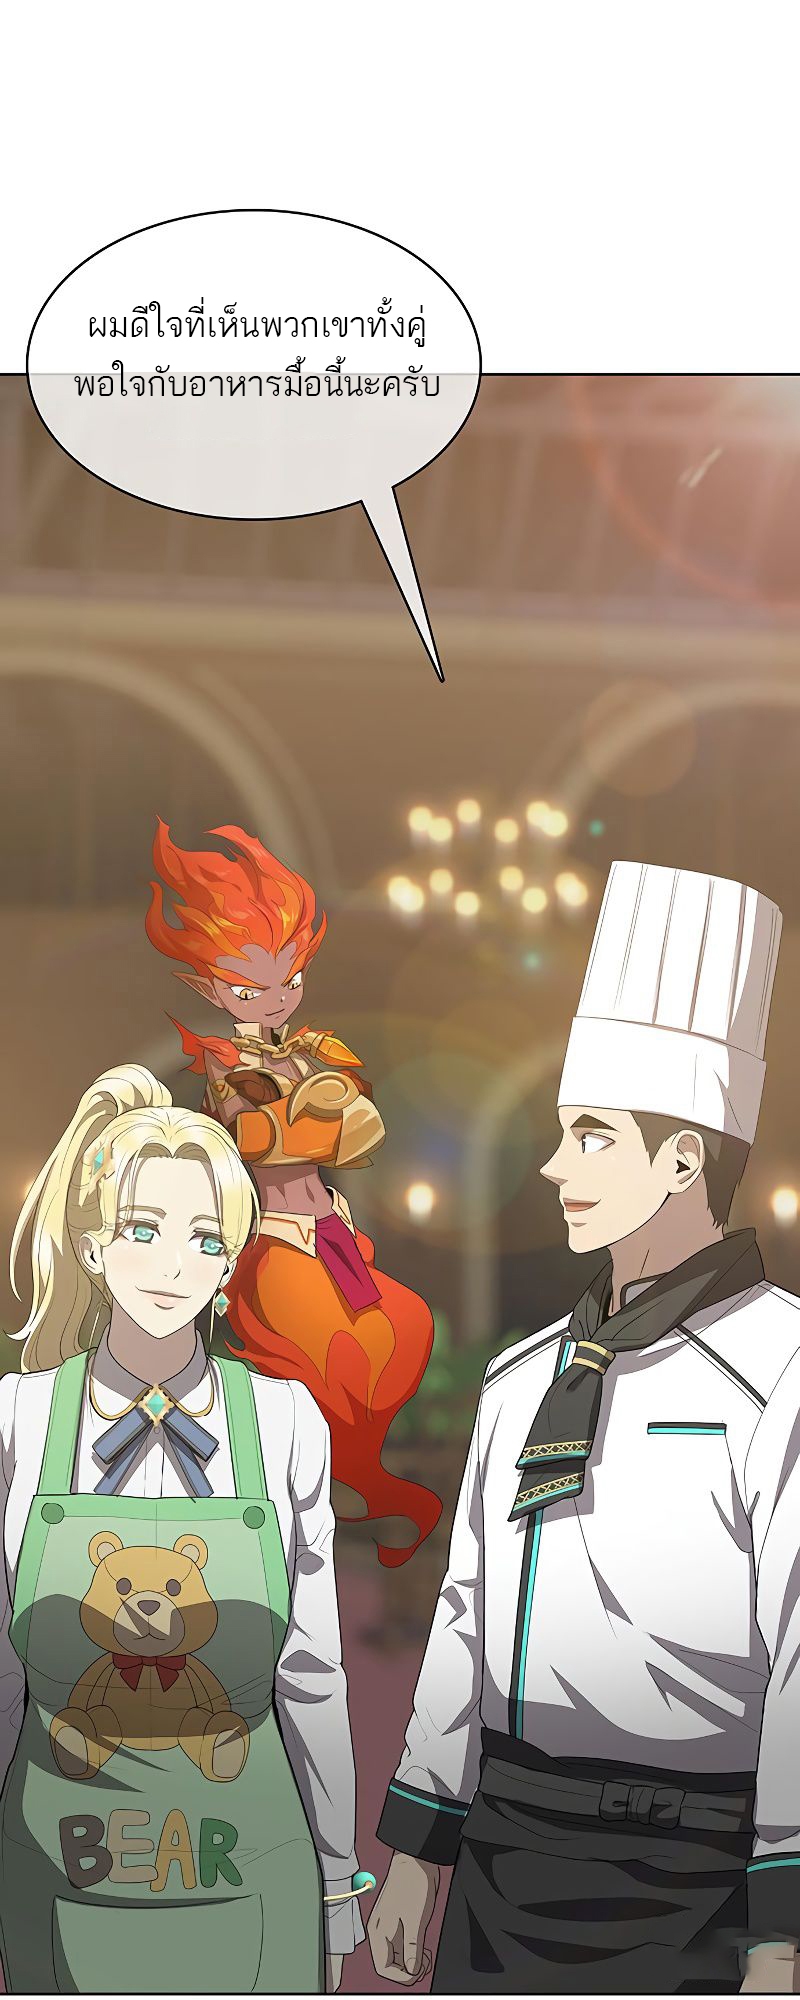 The Strongest Chef in Another World 12 16 04 25670096